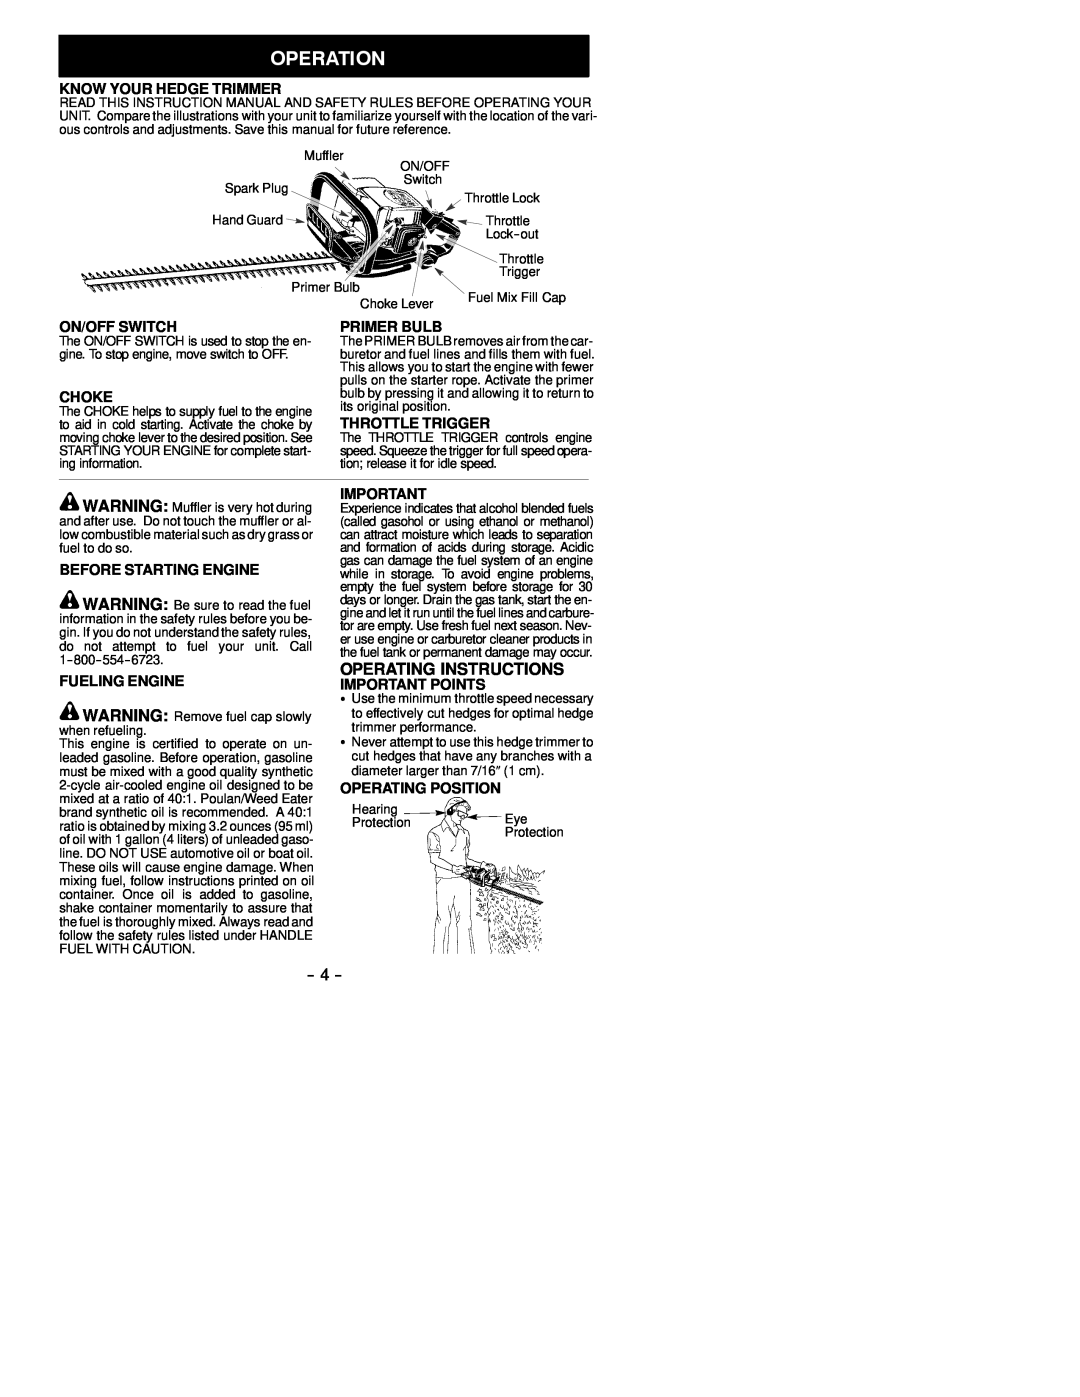 Weed Eater 530163353 Operating Instructions, Know Your Hedge Trimmer, On/Off Switch, Primer Bulb, Choke, Throttle Trigger 